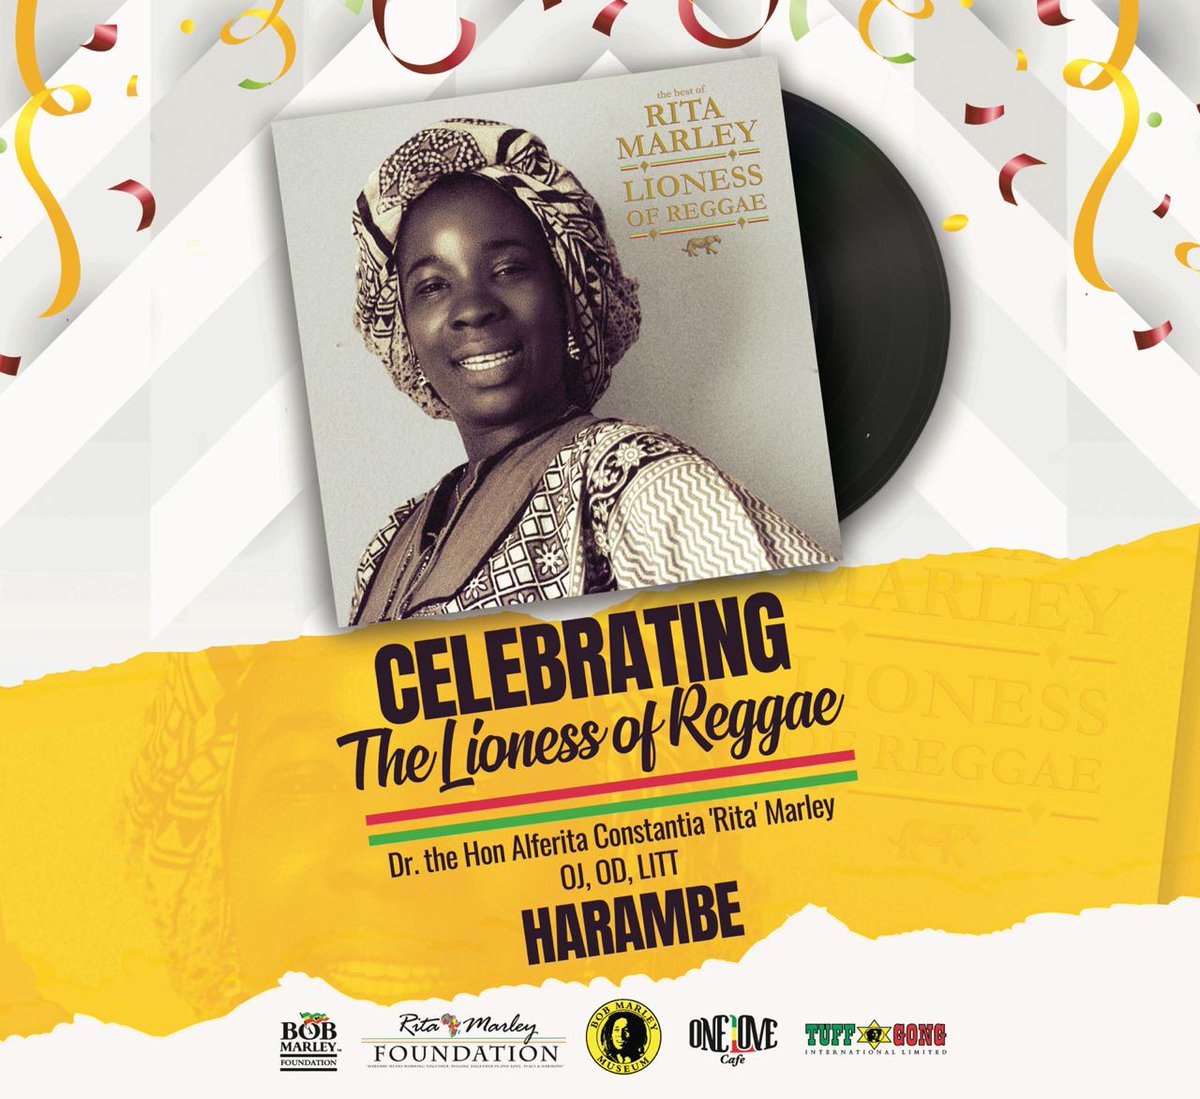 Today on #NationalHeroesDay, we celebrate @nanaritamarley, the #LionessOfReggae, for her contribution to the development of Jamaican music and for her humanitarian work as she is awarded #Jamaica’s fifth highest honor, The Order of Jamaica! 🇯🇲🏅
HARAMBE
#ritamarley